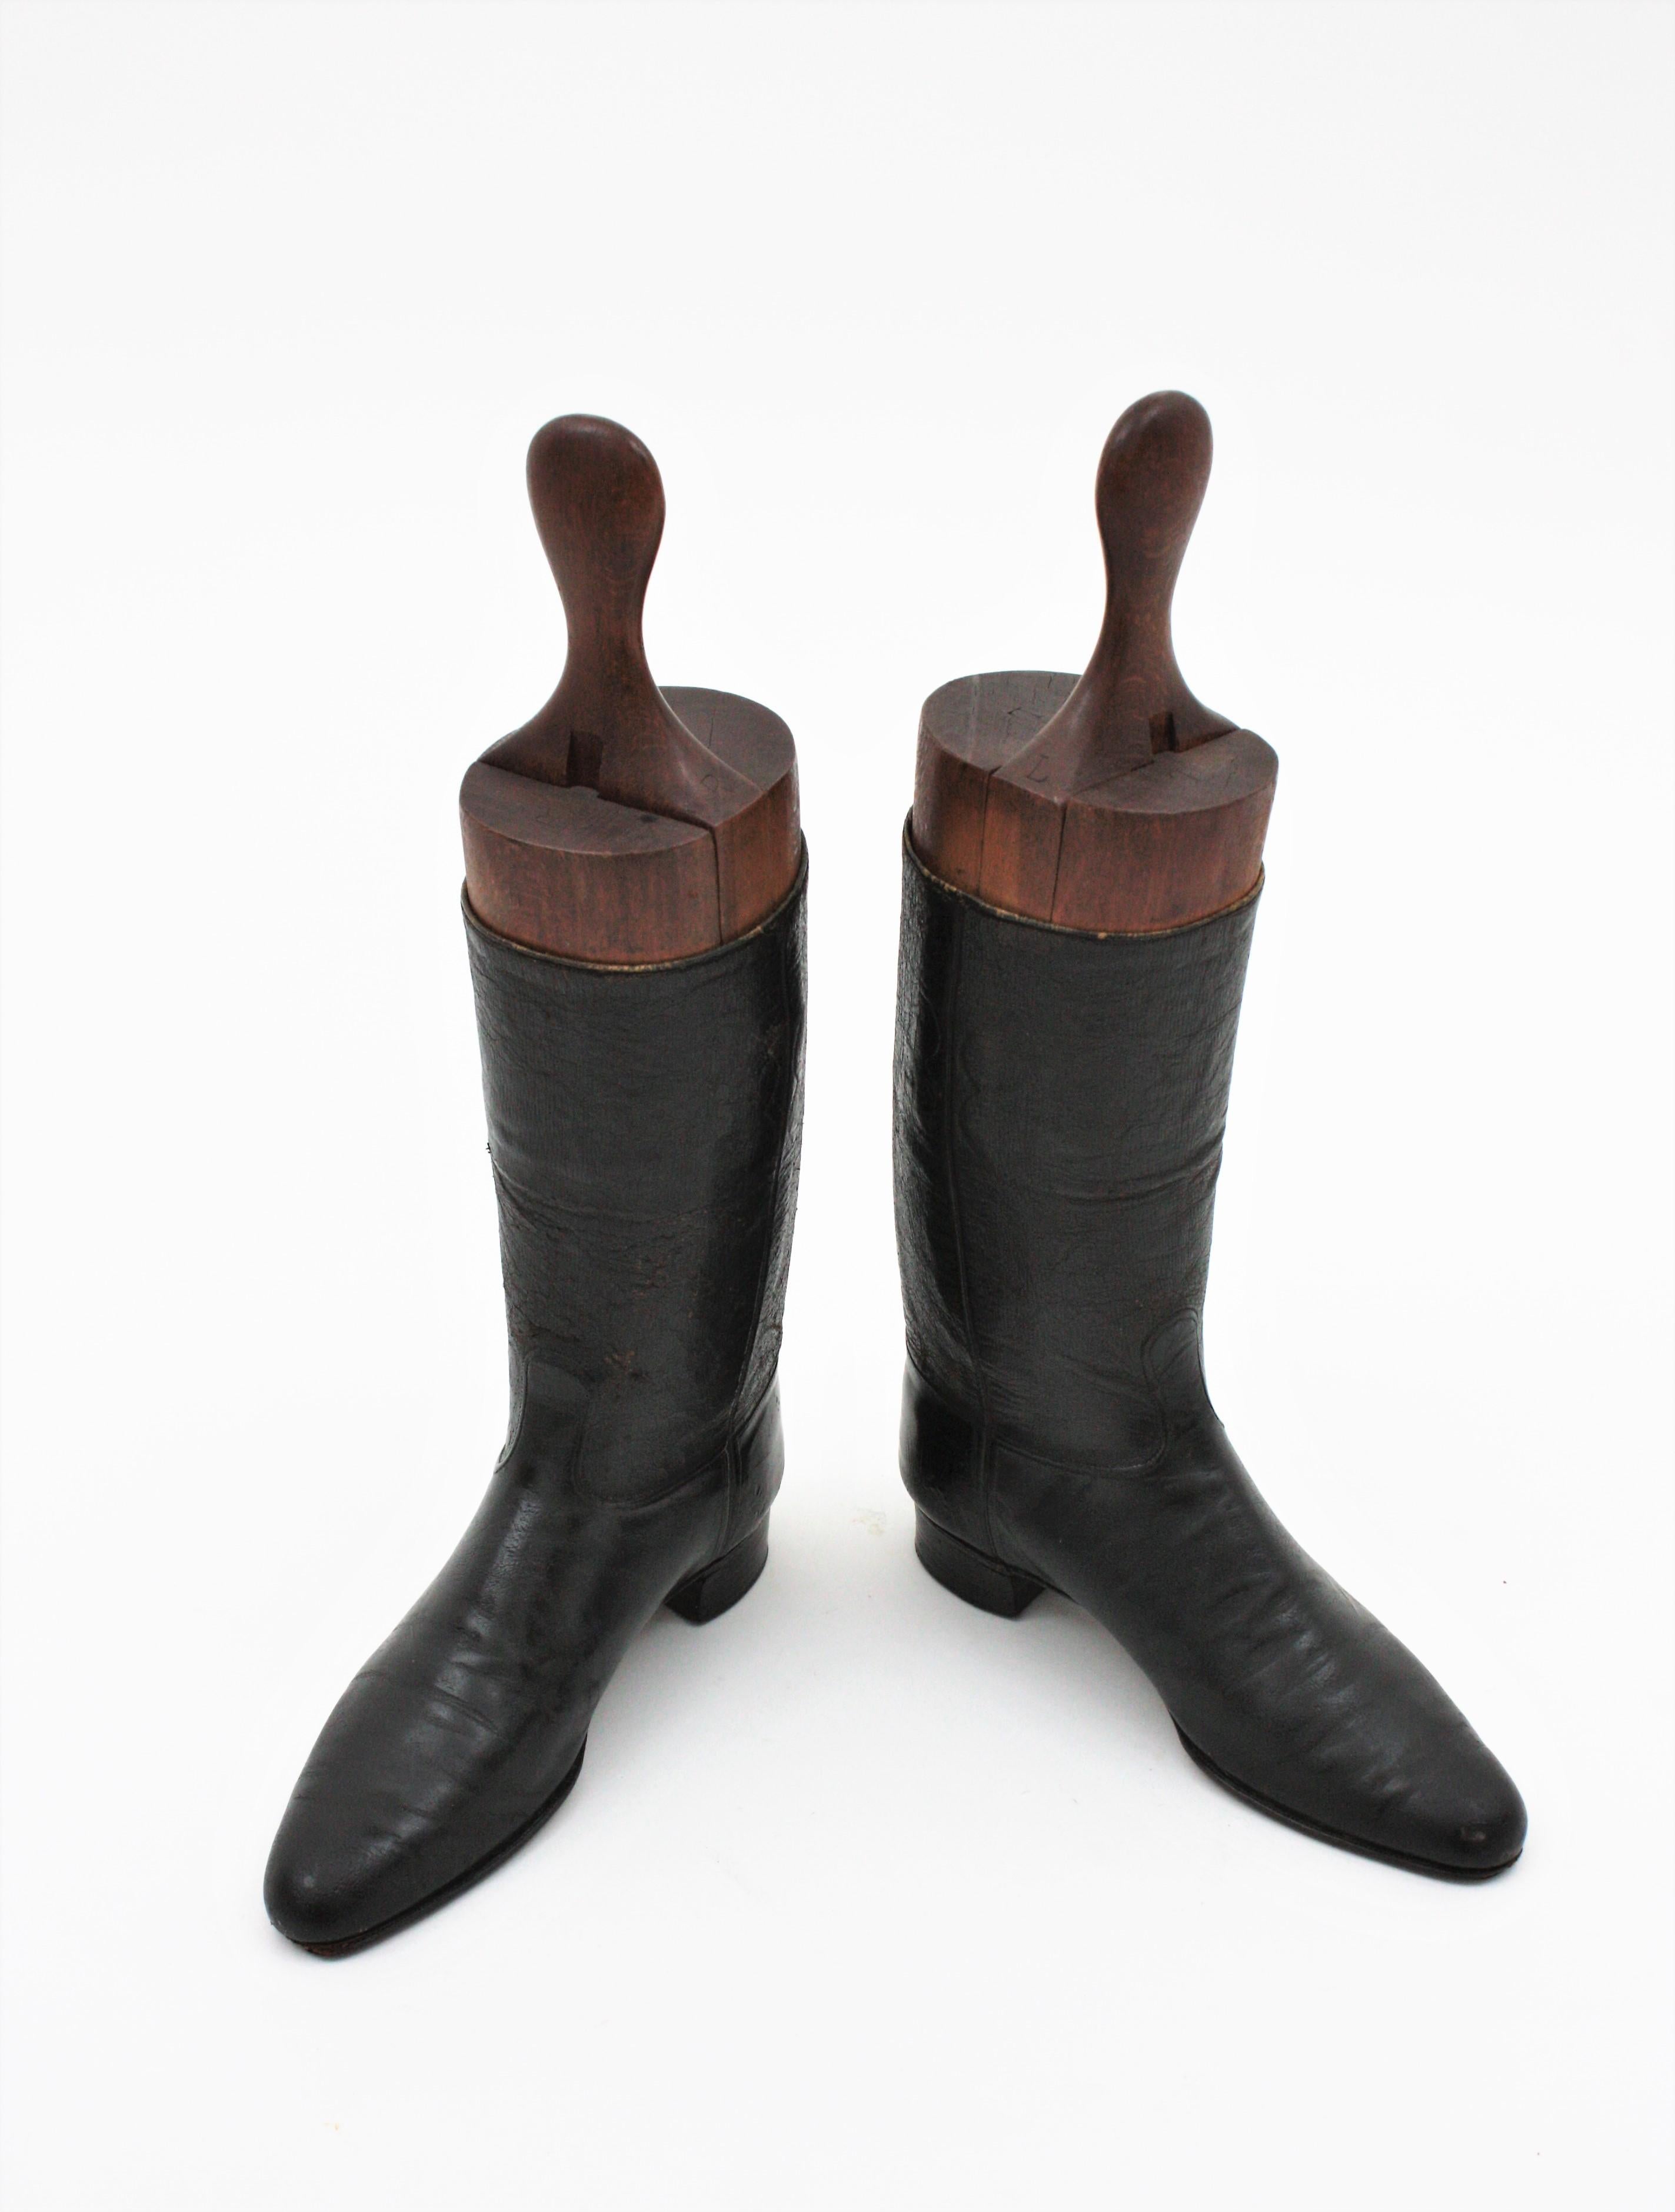 19th century riding boots